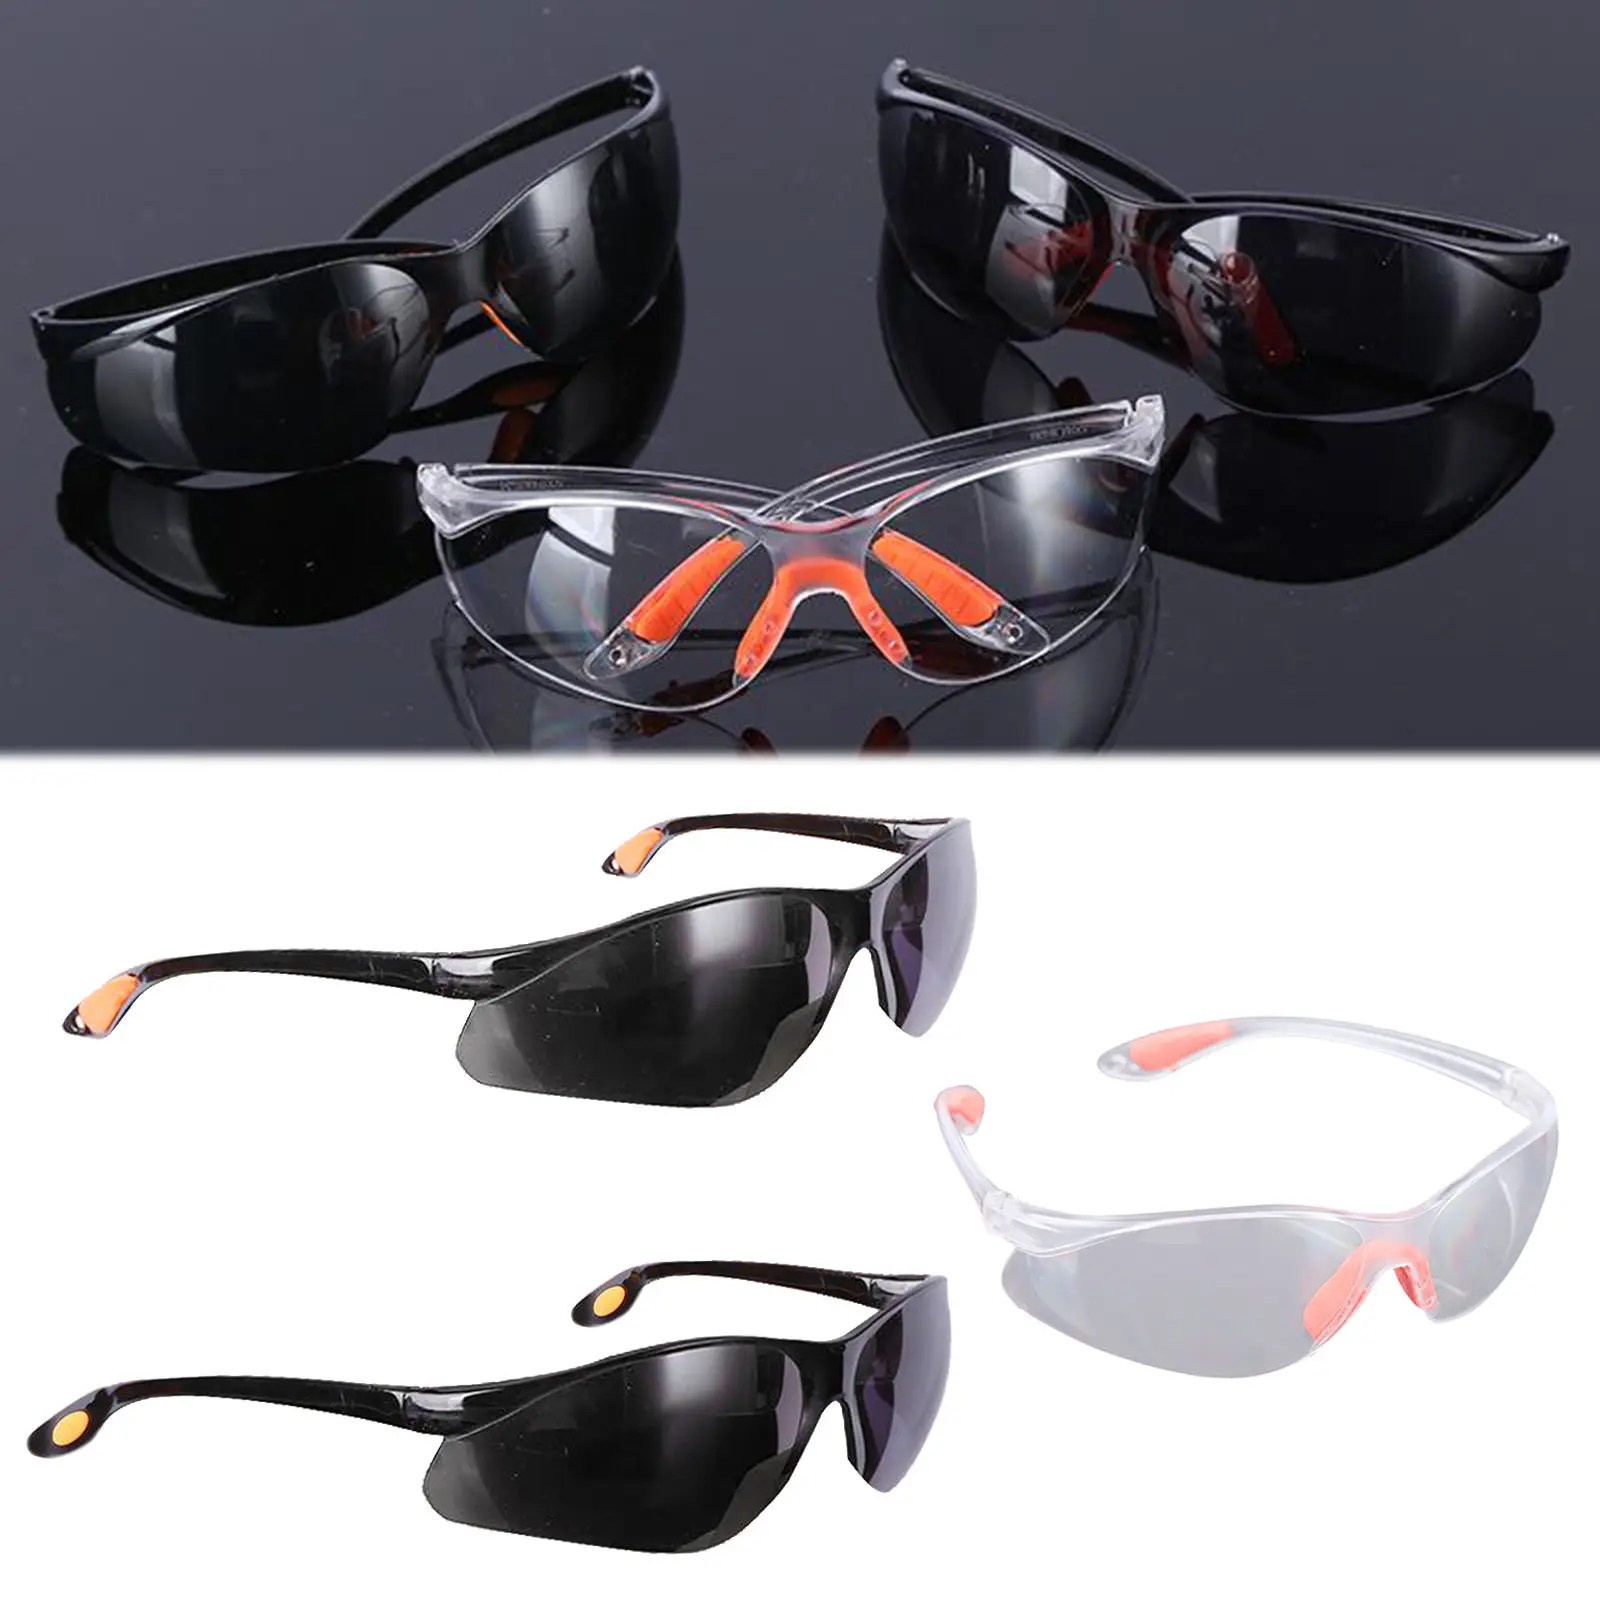 Protective Safety Glasses,Crystal Clear & Anti-Fog Design,High Impact Resistance,Perfect Eye Protection for Lab, Chemical